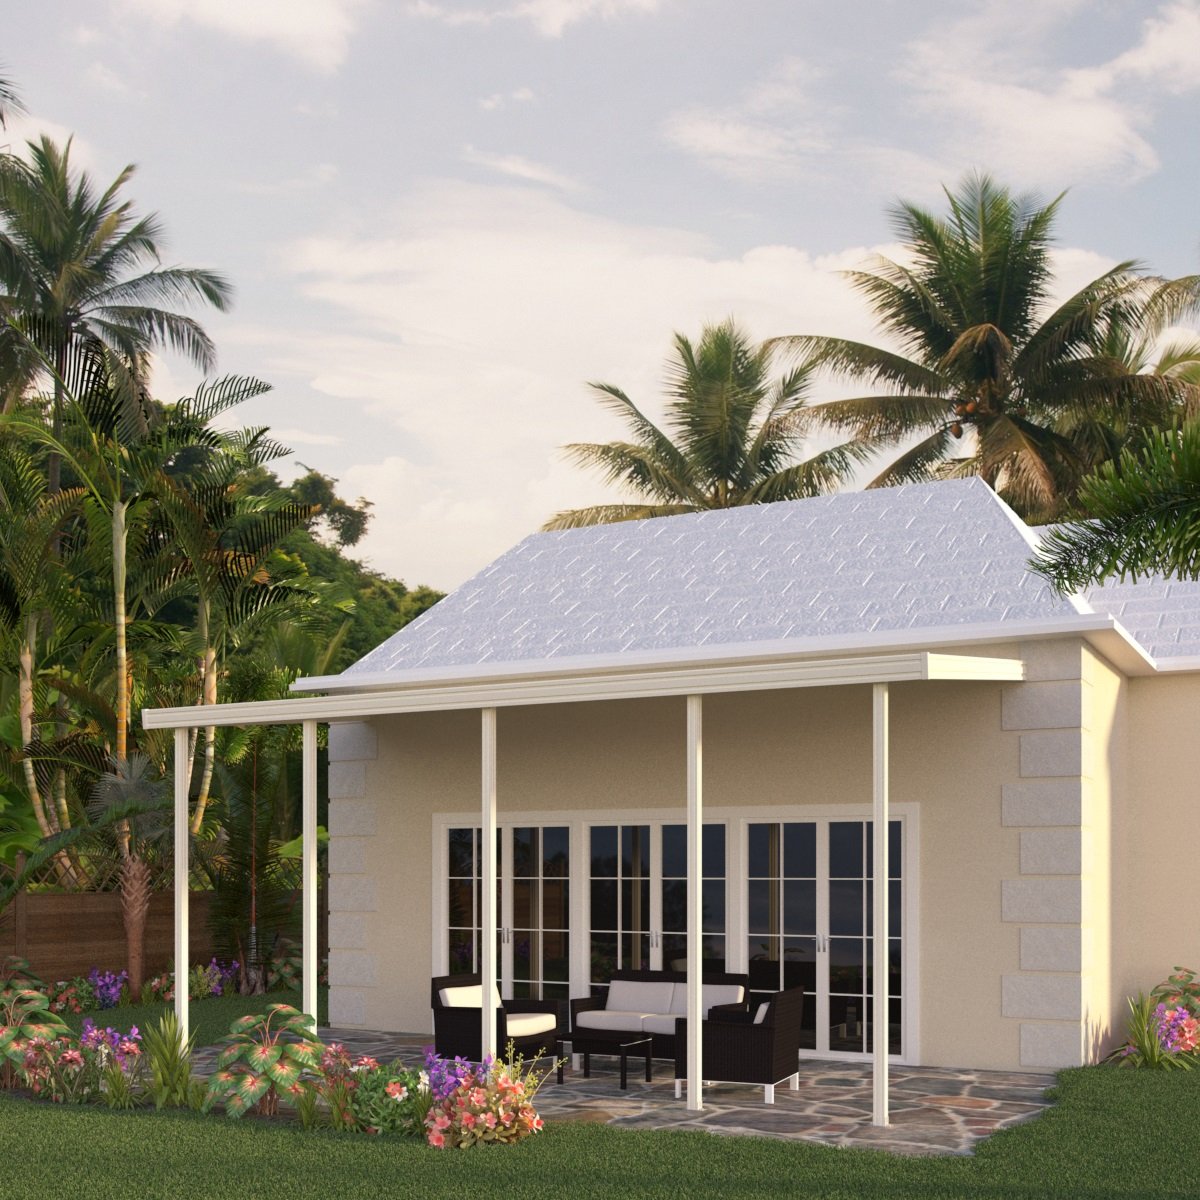 14 ft. Deep x 22 ft. Wide Ivory Attached Aluminum Patio Cover -4 Posts - (10lb Low Snow Area)